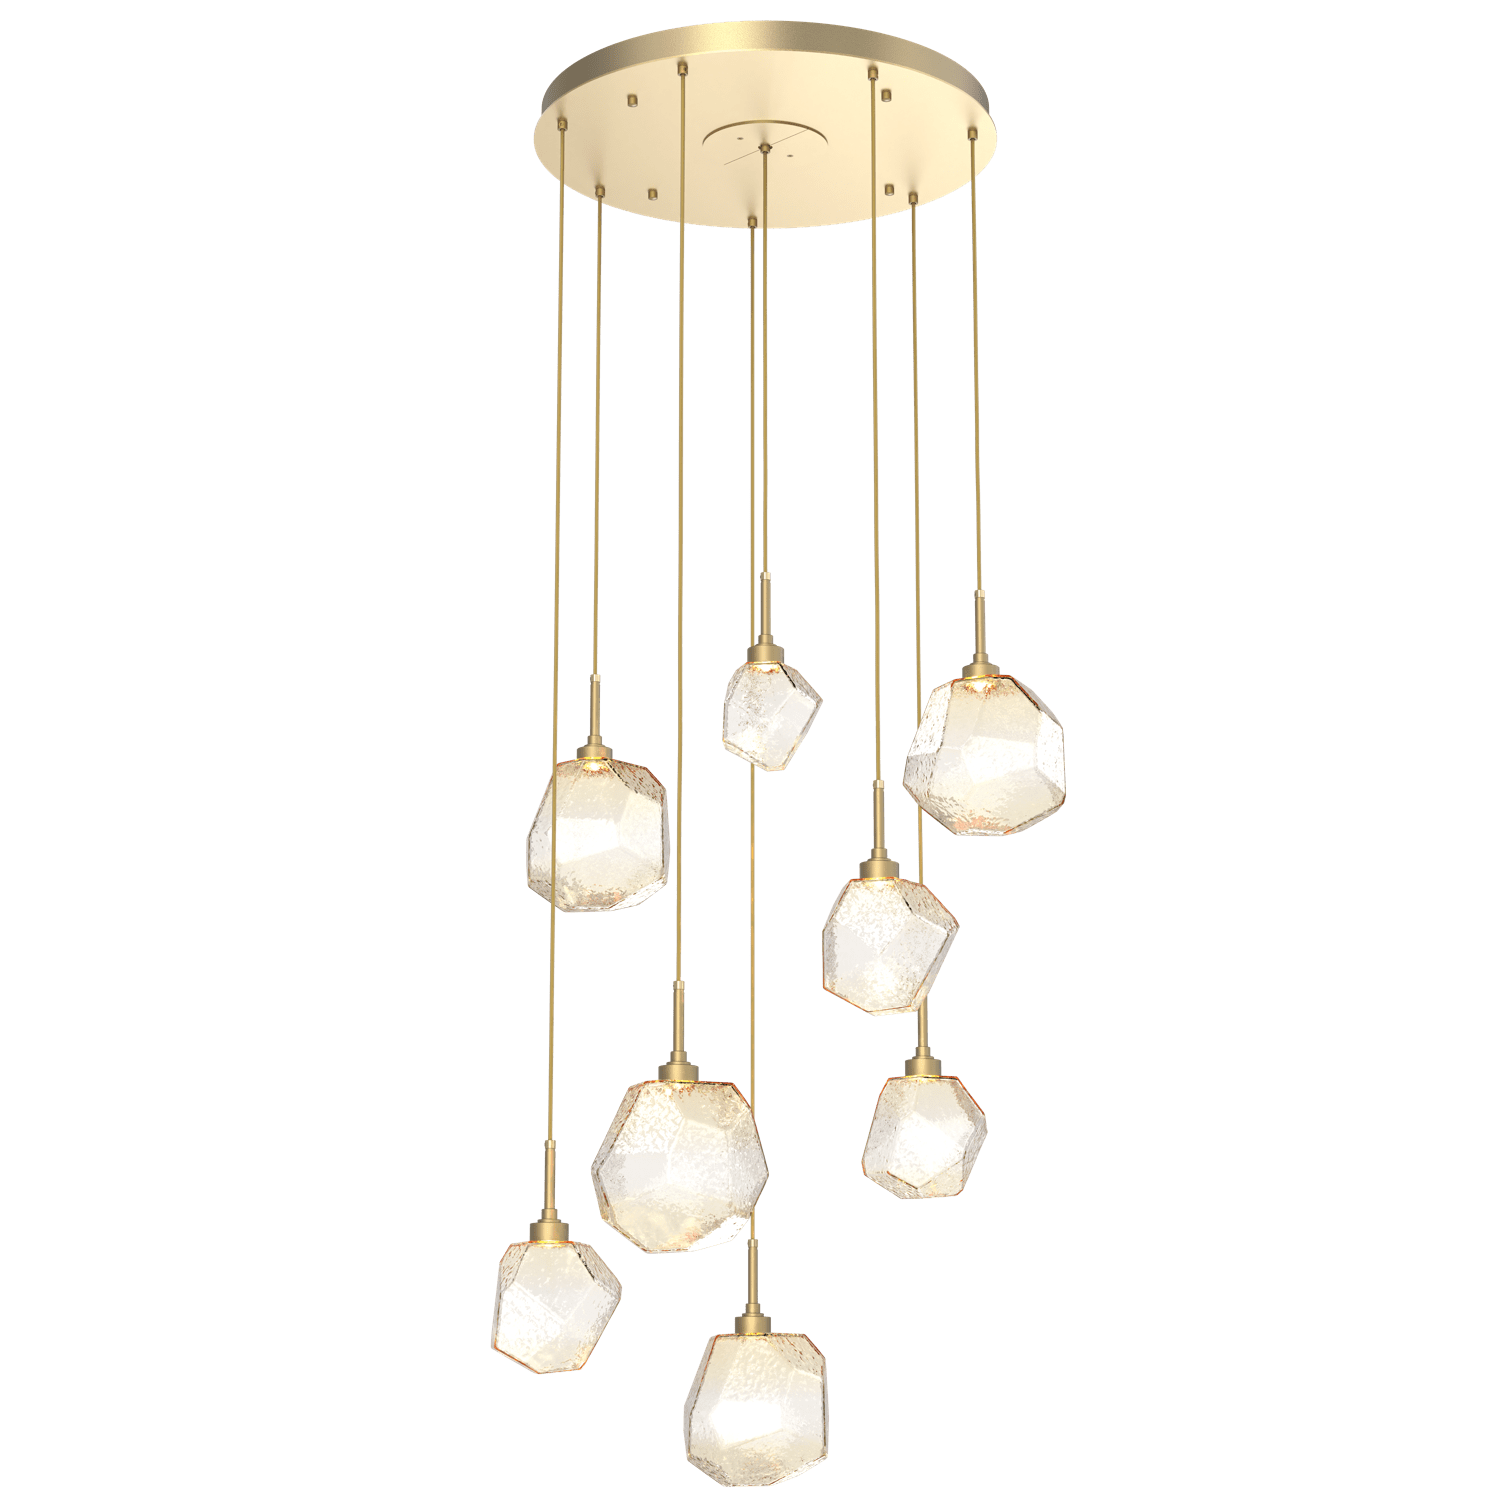 CHB0039-08-GB-A-Hammerton-Studio-Gem-8-light-round-pendant-chandelier-with-gilded-brass-finish-and-amber-blown-glass-shades-and-LED-lamping